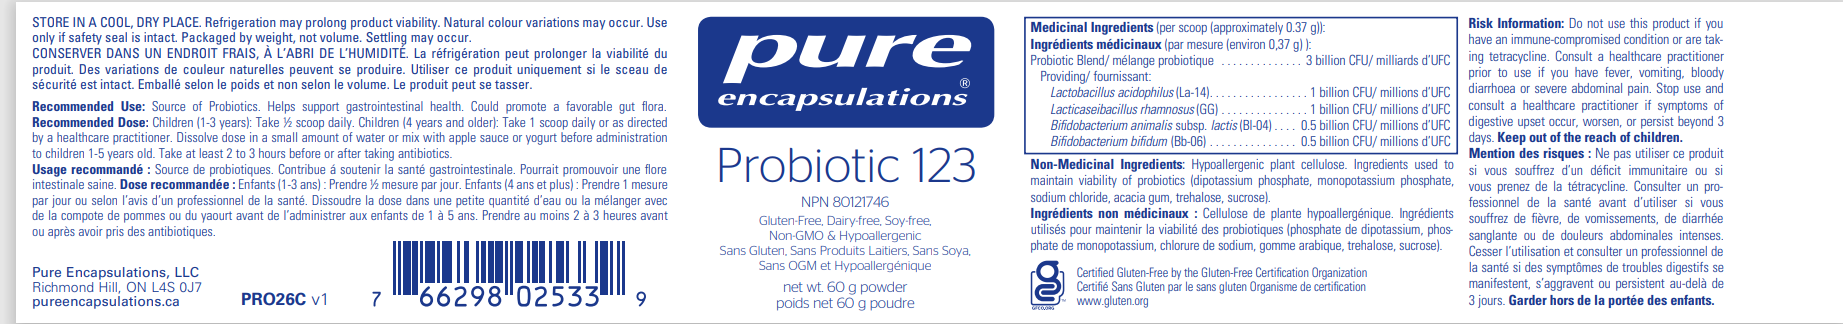 Pure Encapsulations Probiotic 123 (Dairy and Soy-free)